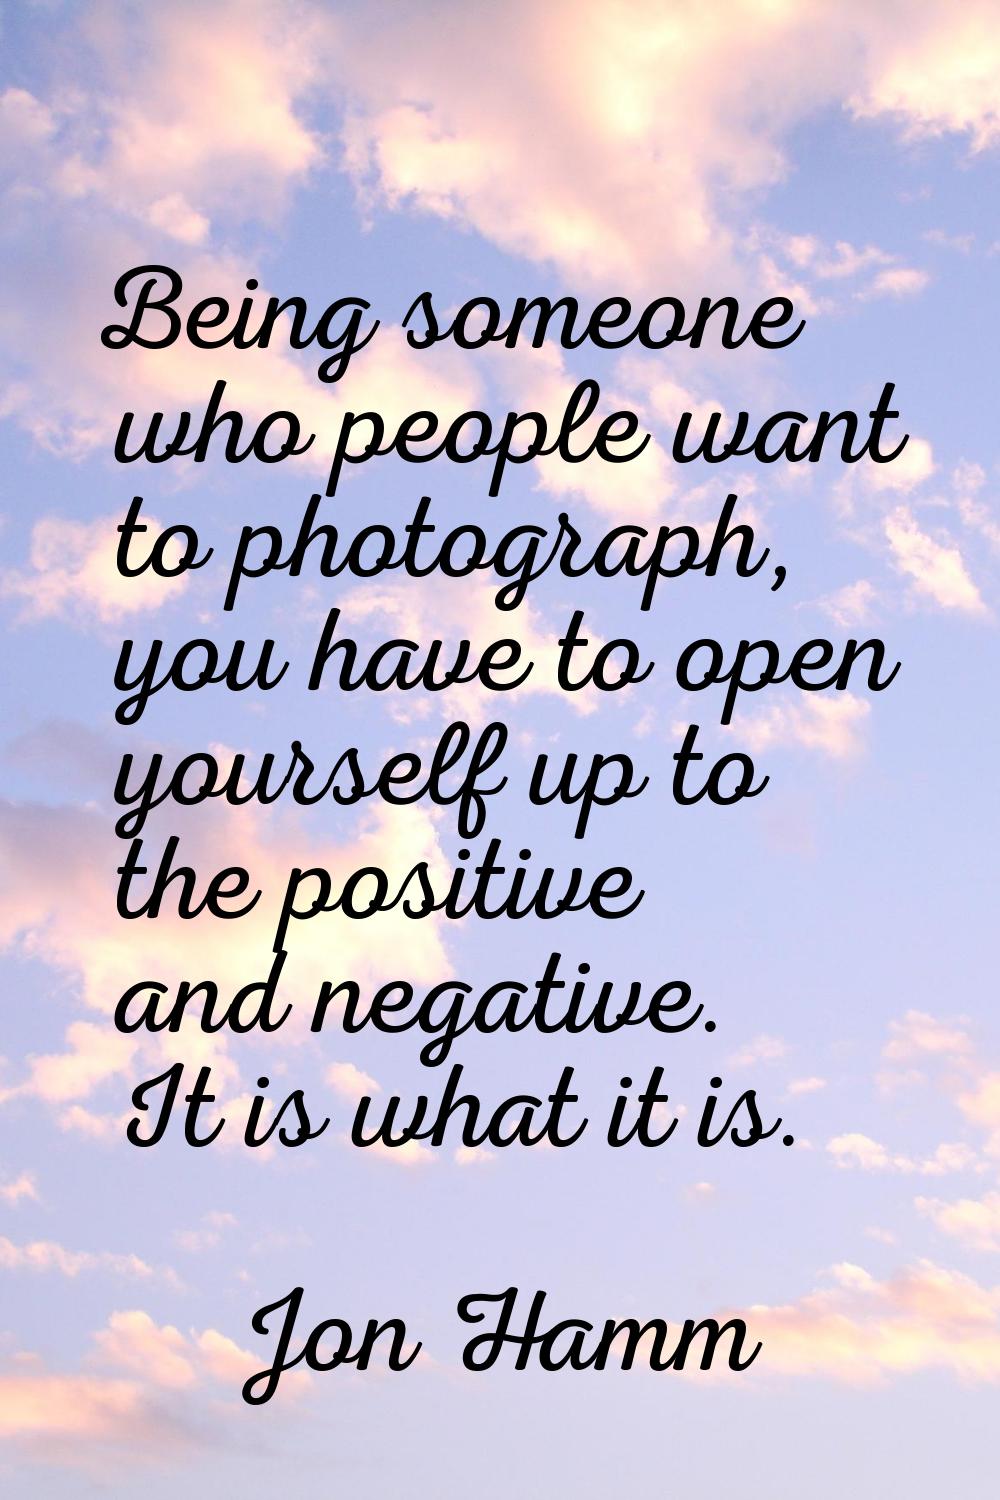 Being someone who people want to photograph, you have to open yourself up to the positive and negat